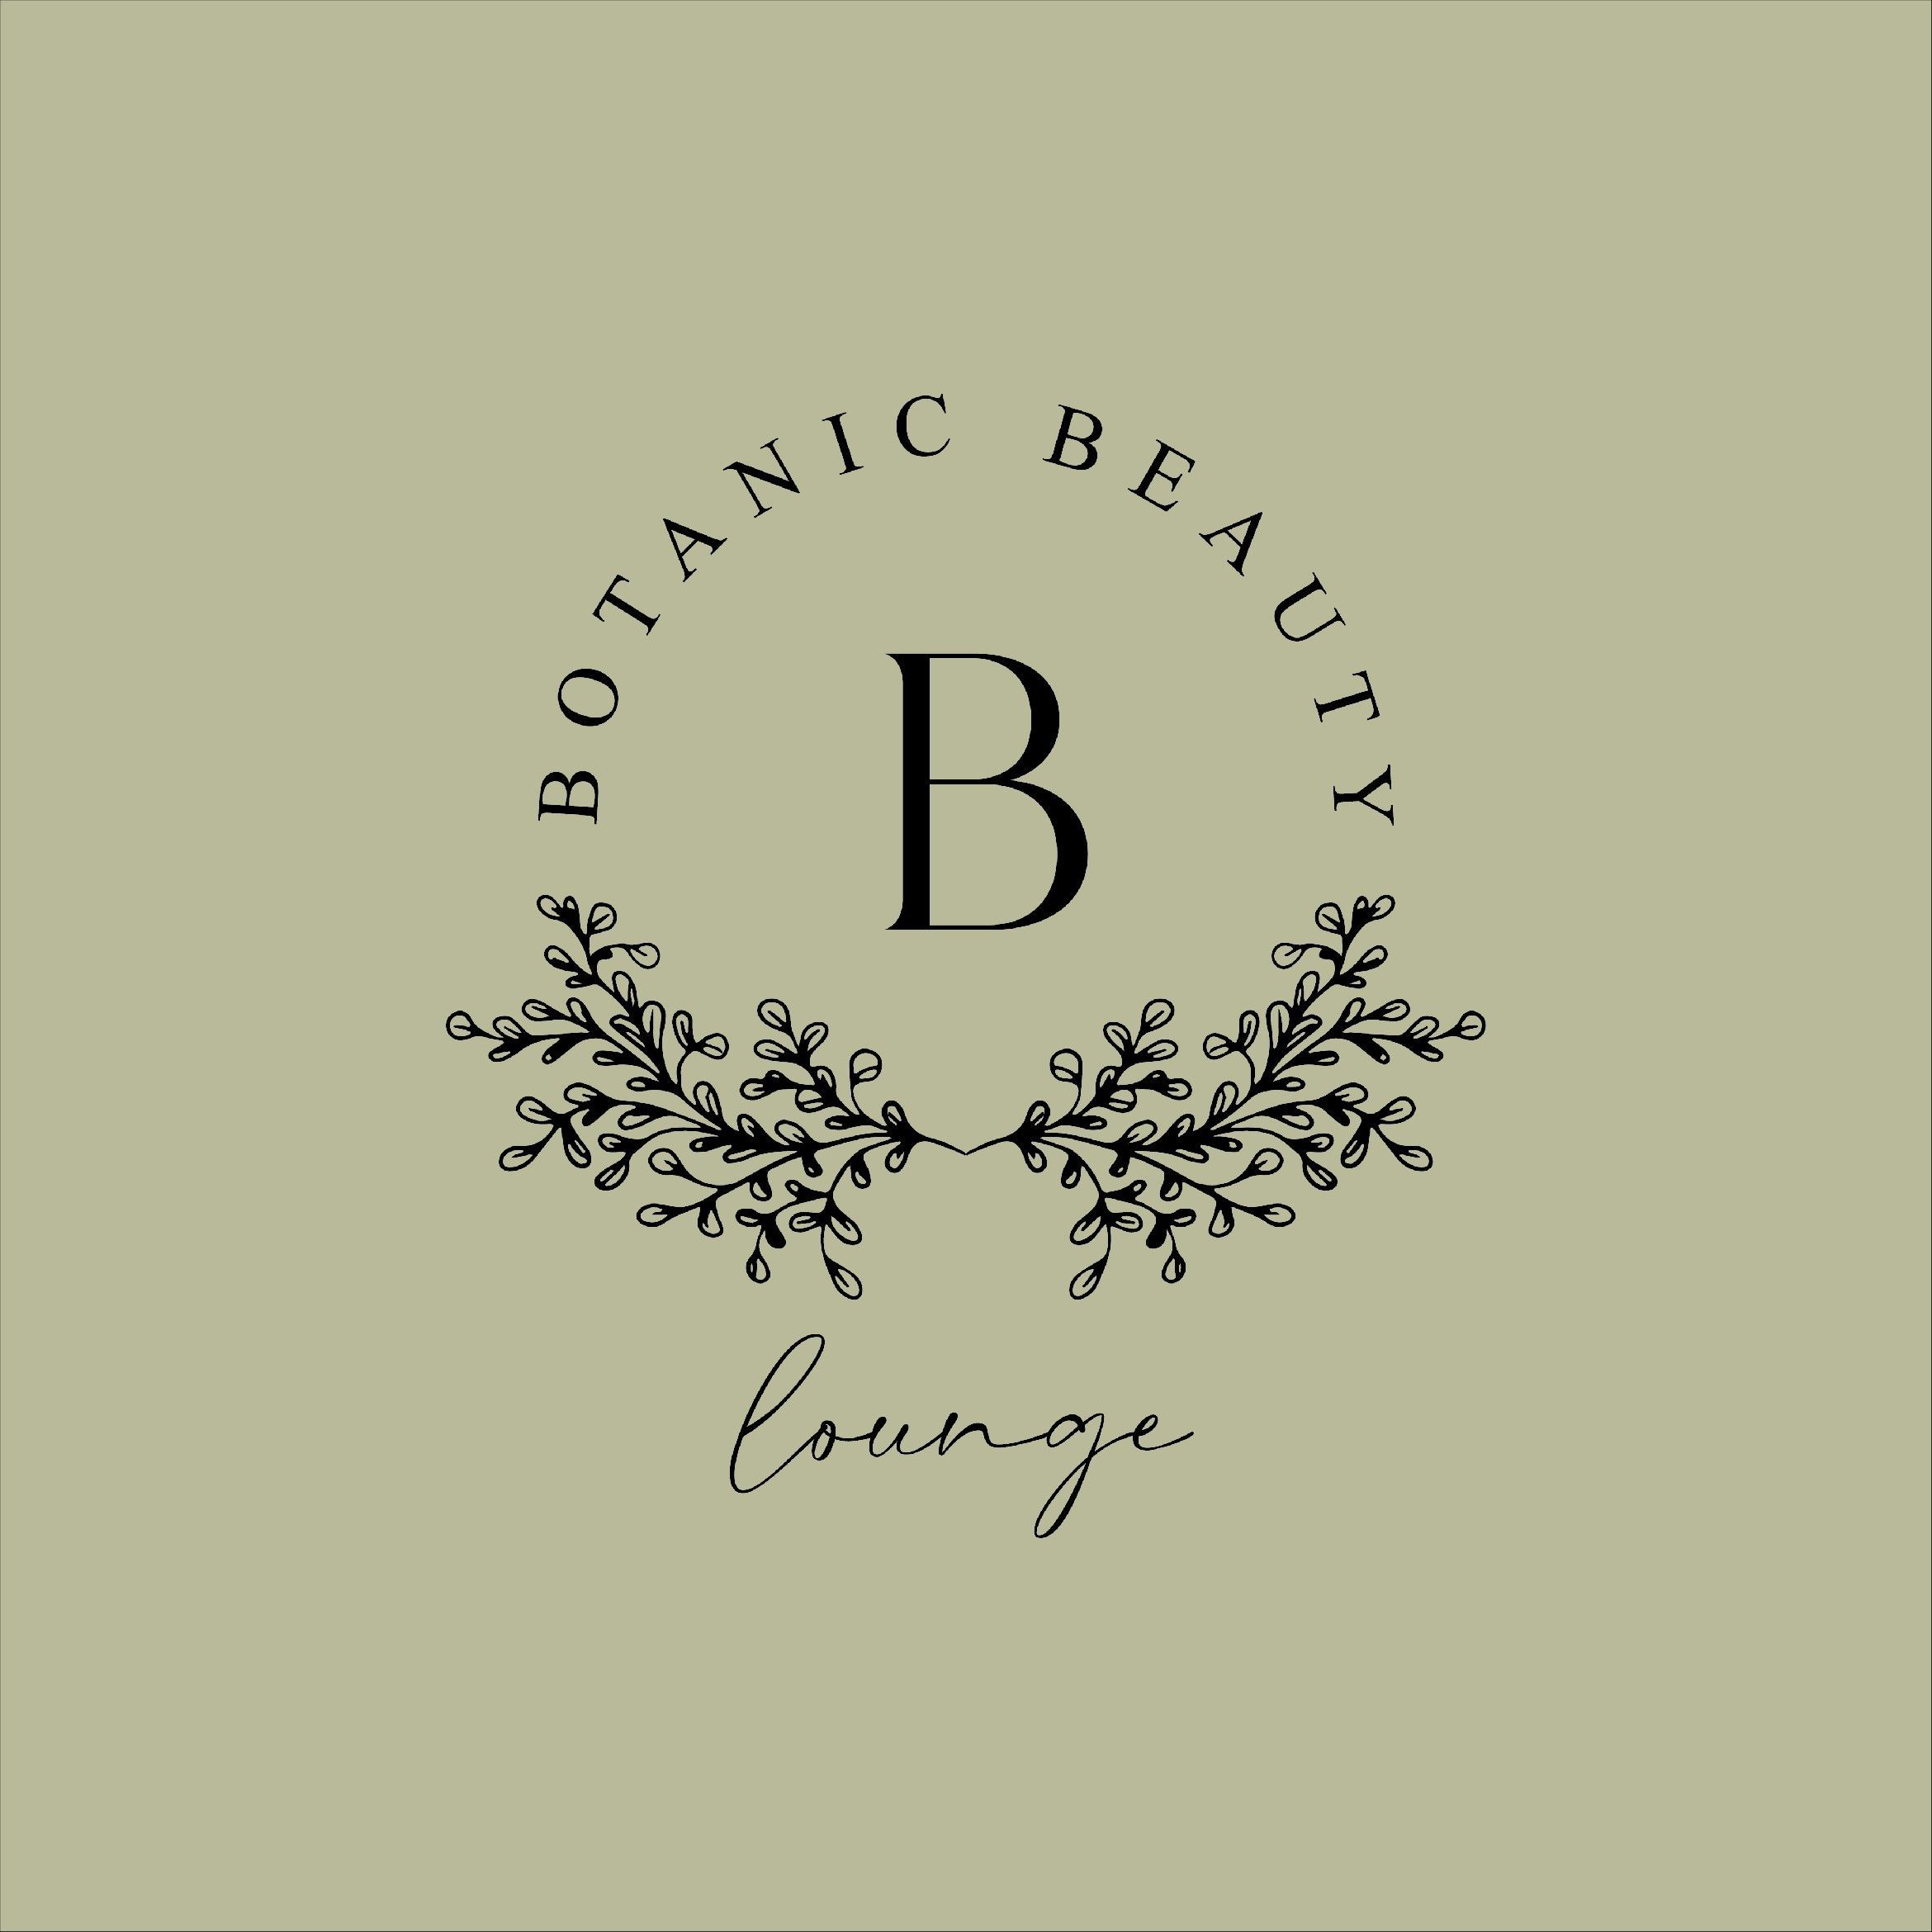 Botanic Beauty Lounge, 776 Manchester Road, OL11 3AW, Manchester